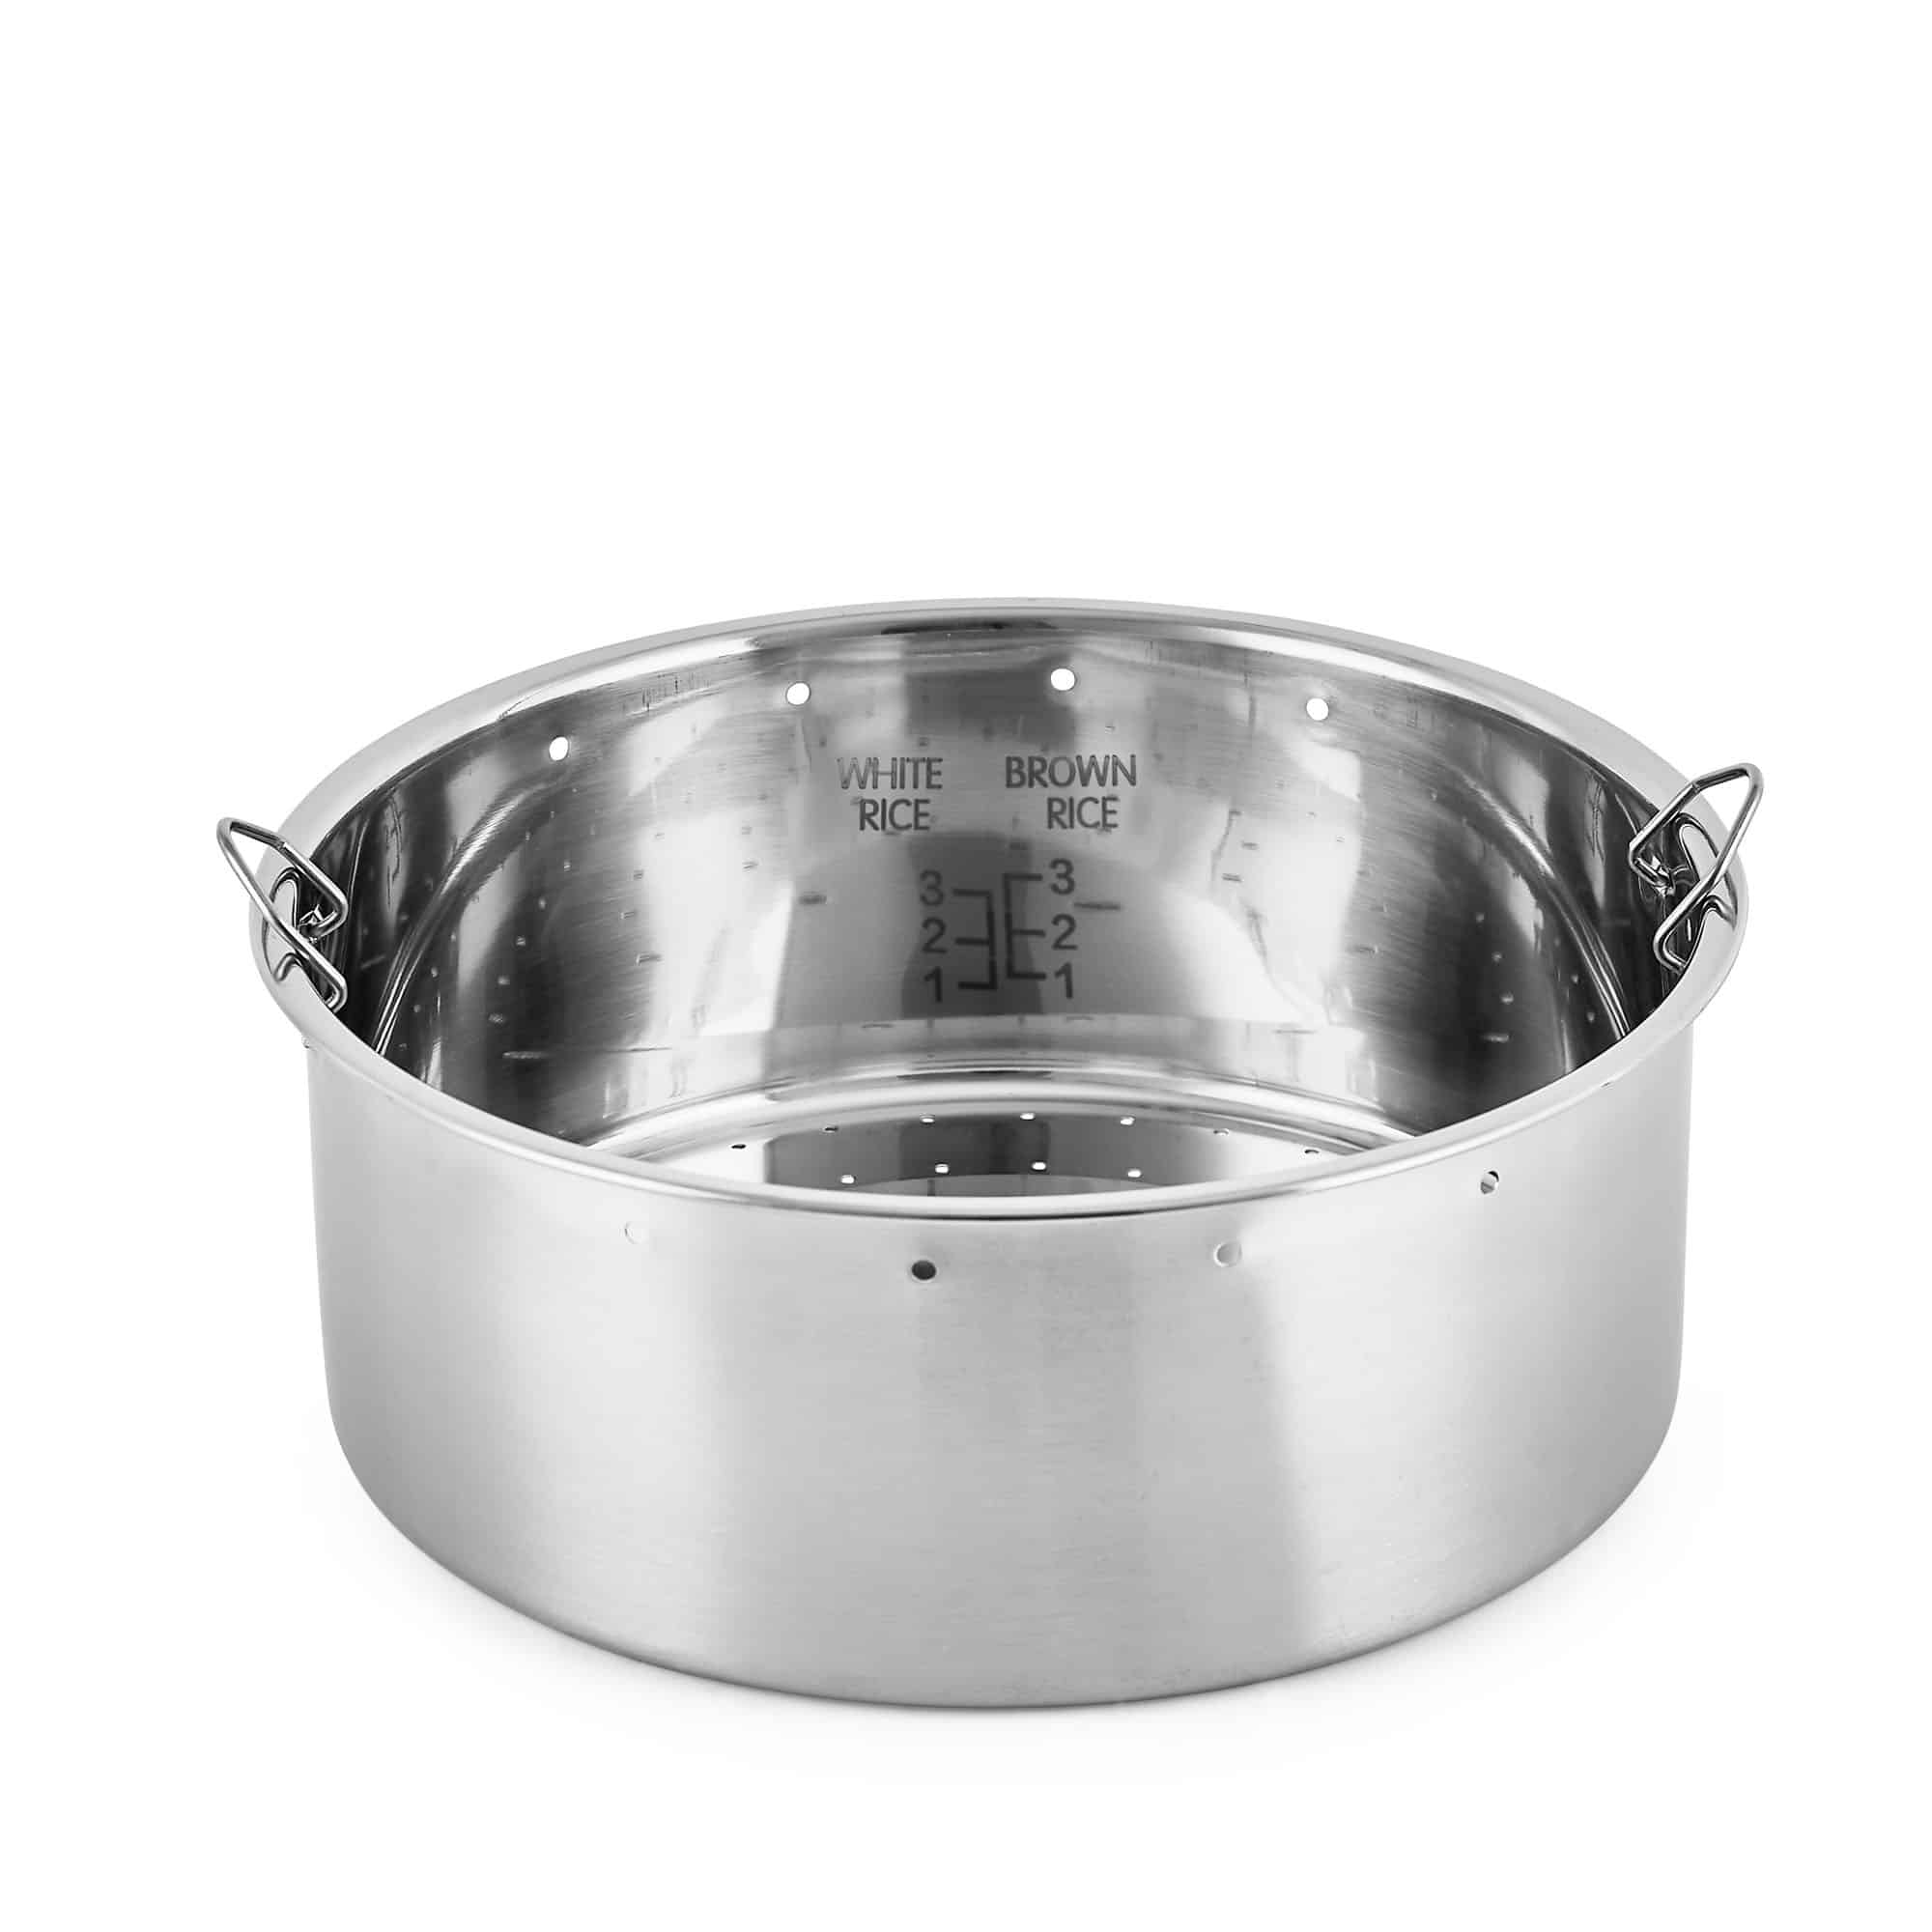 Luxshiny Rice Cooker Rice Cooker Rice Cooker Steamer Basket with Handle  Legs Vegetable Steamer Insert Stainless Steel for Steaming Food Meat Fish  Rice